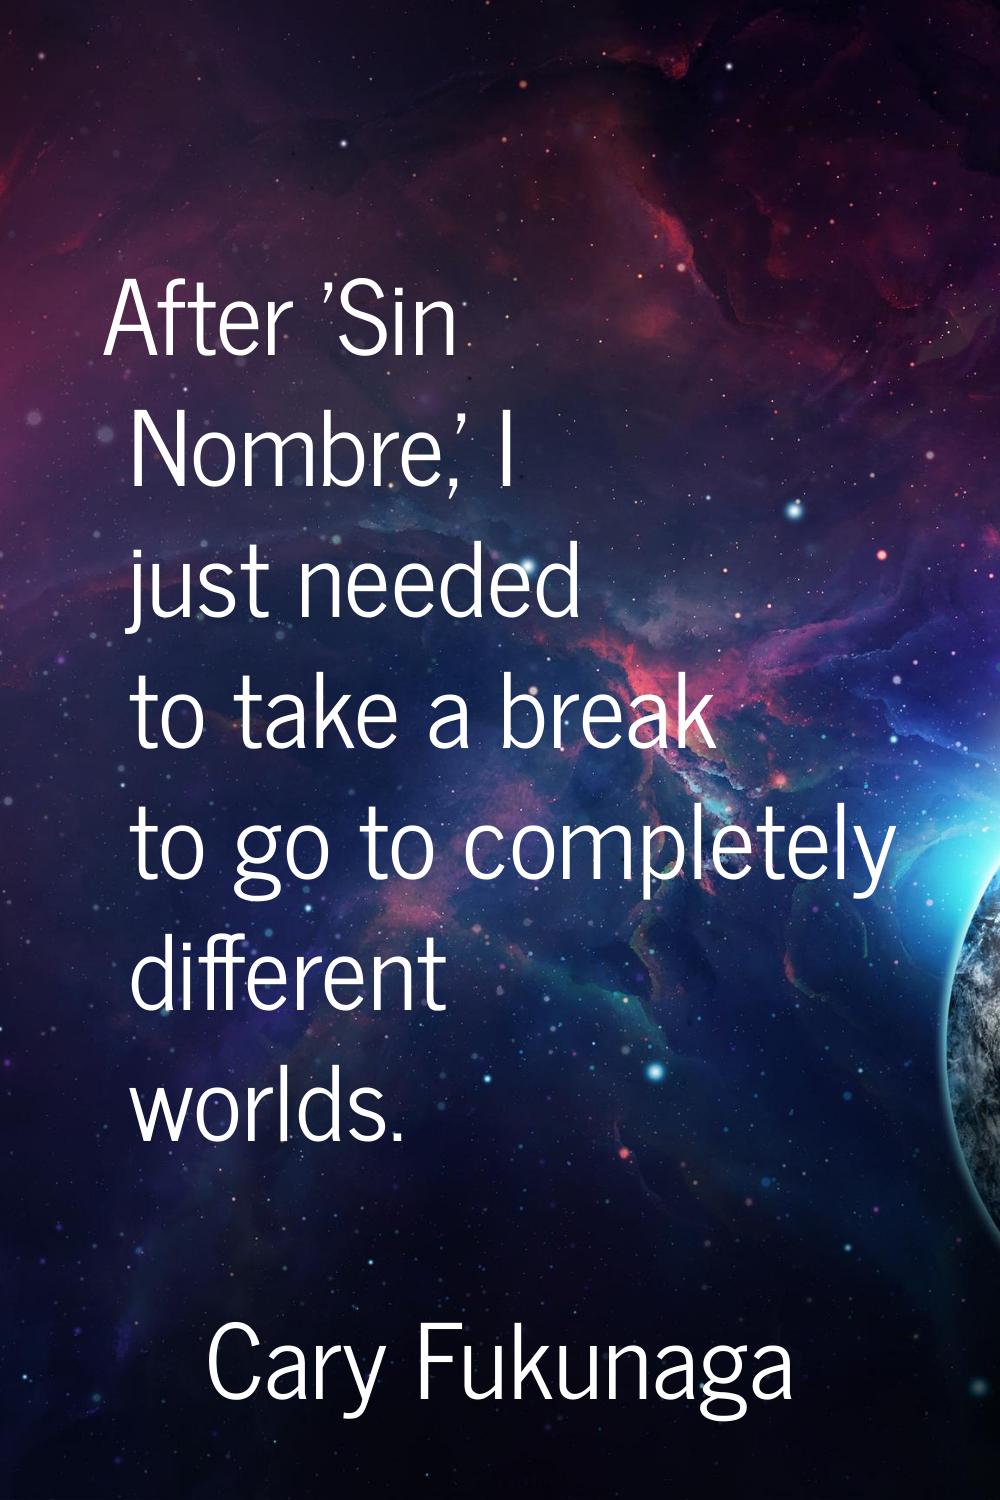 After 'Sin Nombre,' I just needed to take a break to go to completely different worlds.